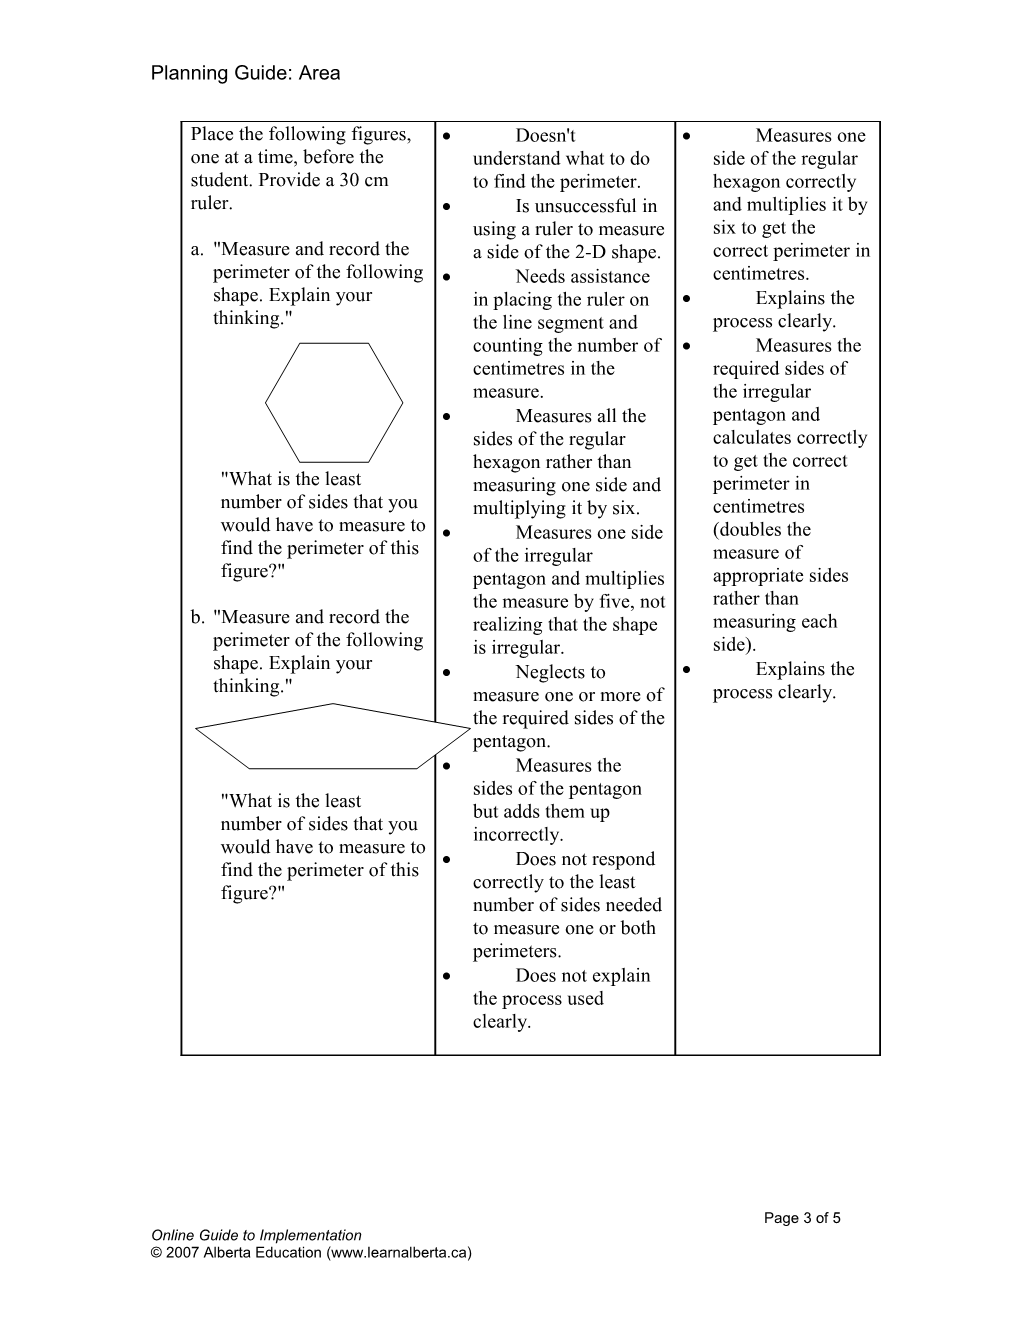 Ways to Assess and Build on Prior Knowledge s1